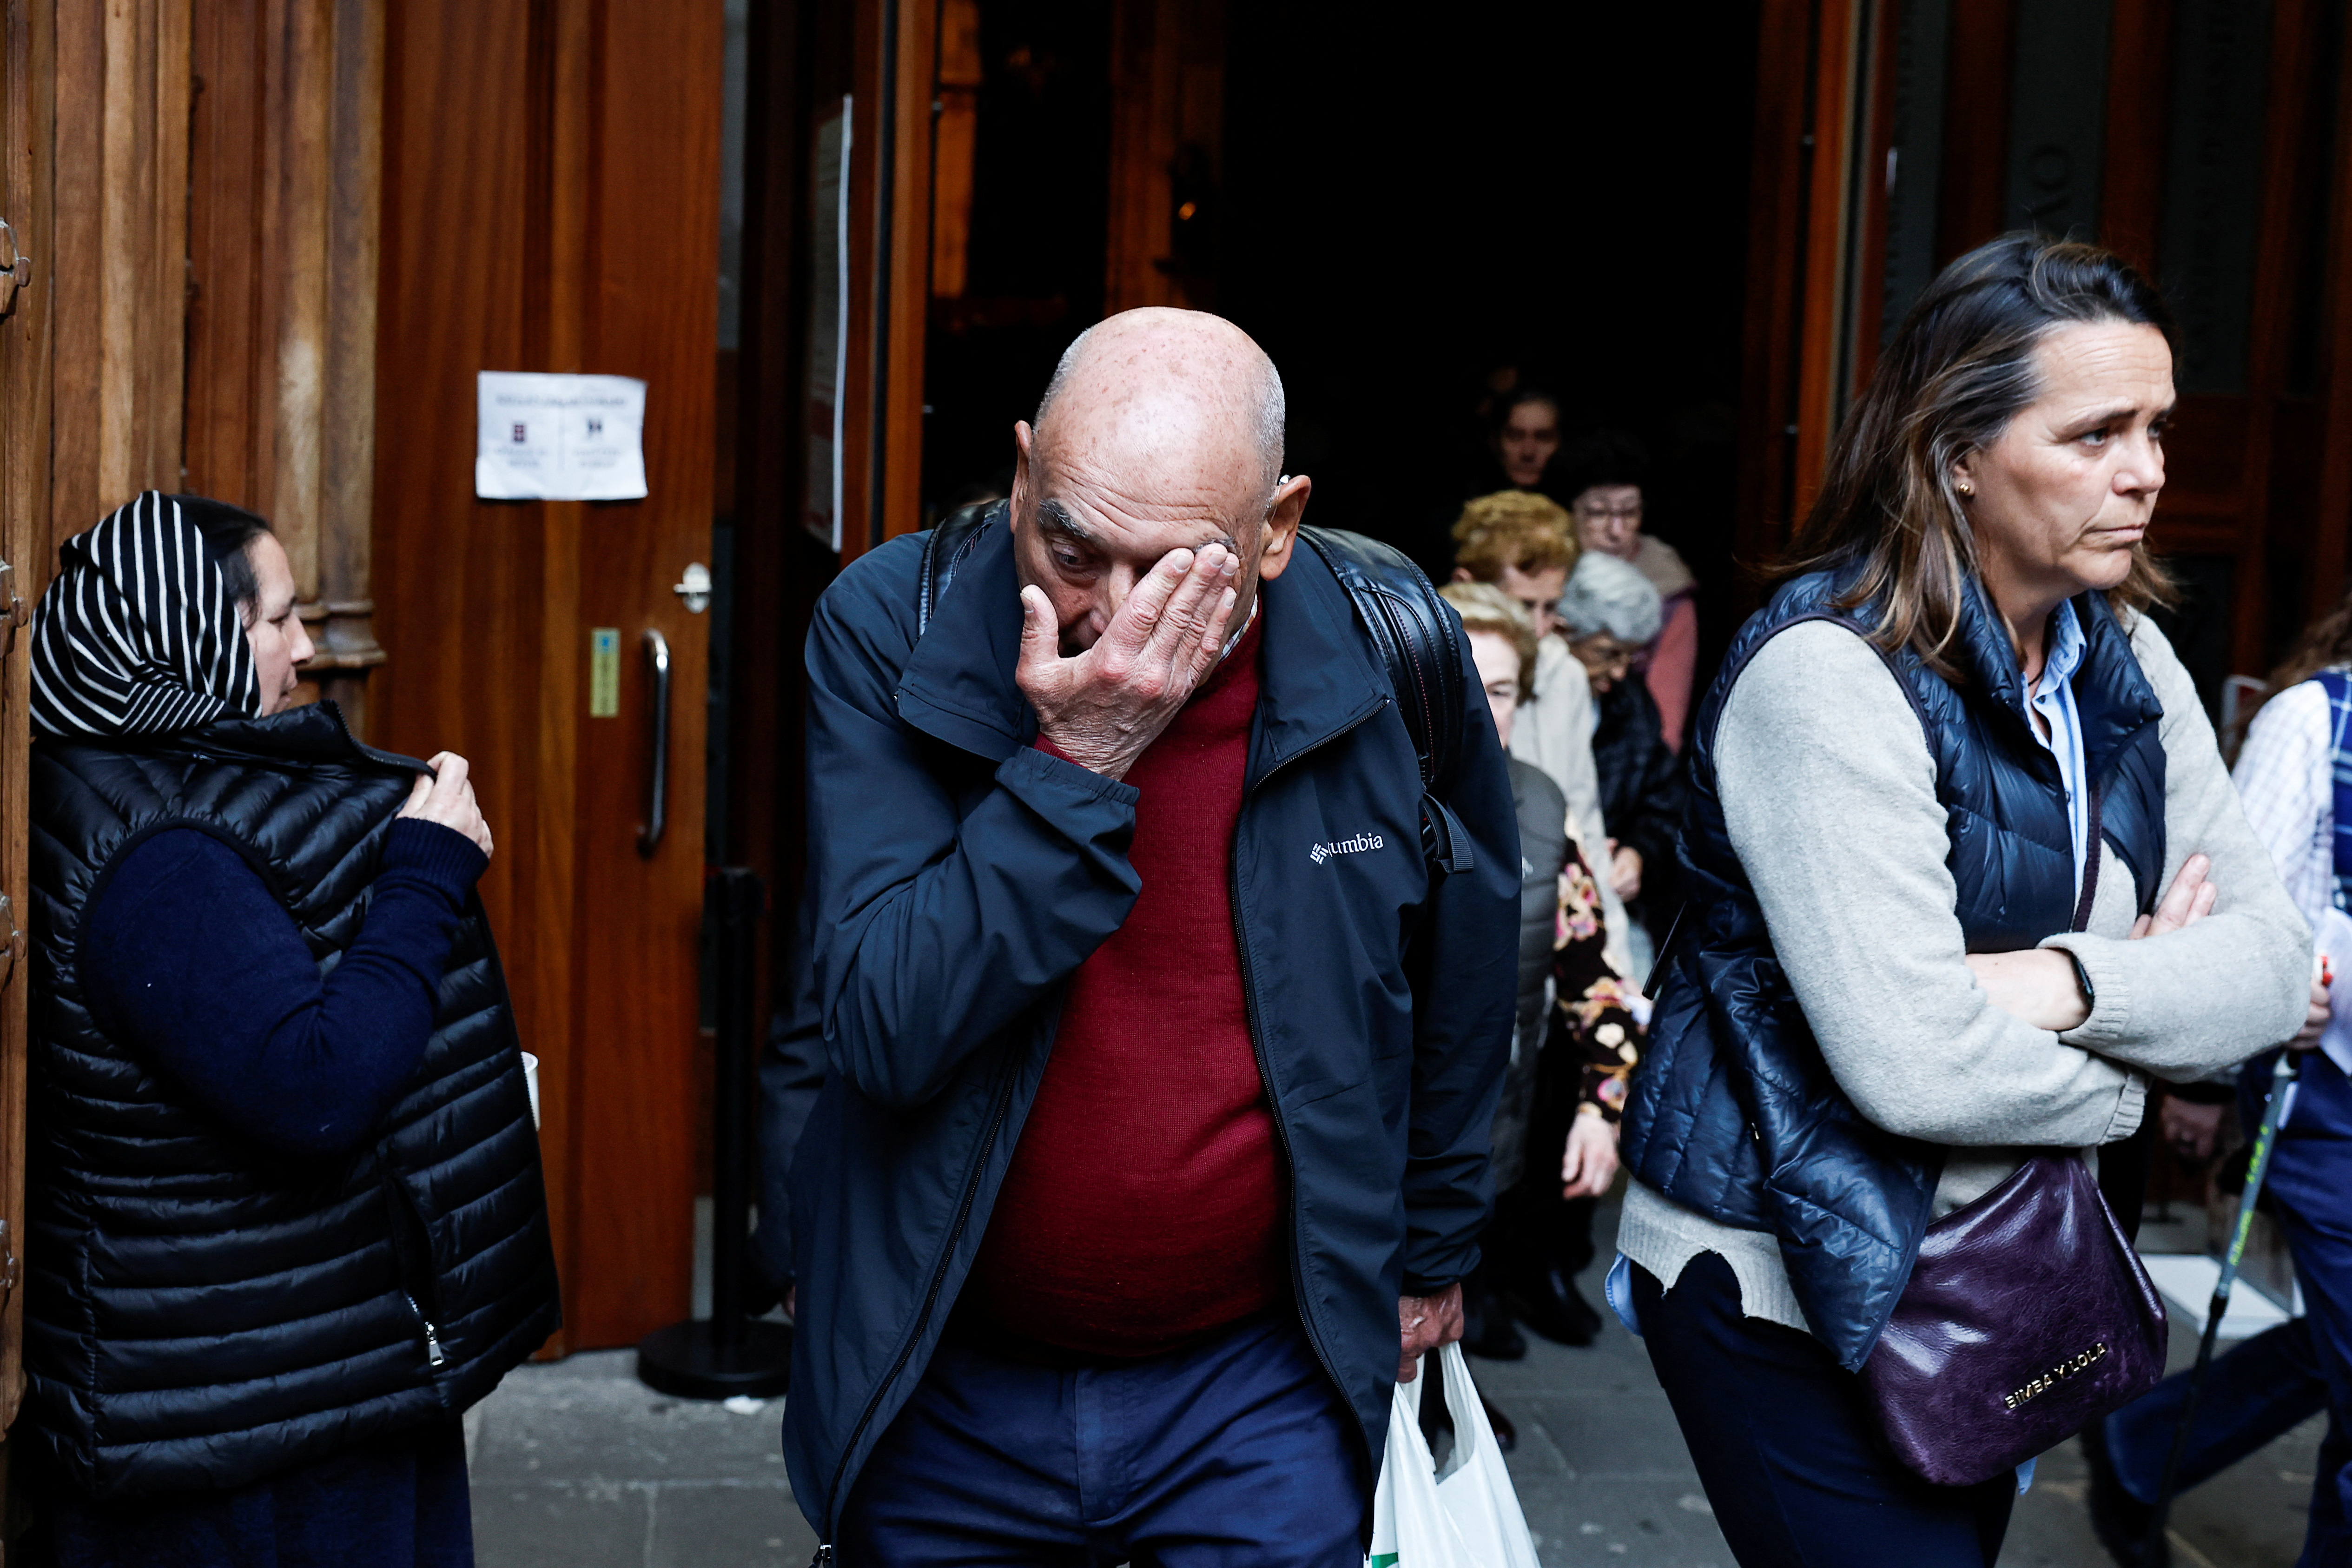 A man reacts on leaving a mass where forgiveness was asked for from victims of sexual abuse by the Catholic Church, in Bilbao